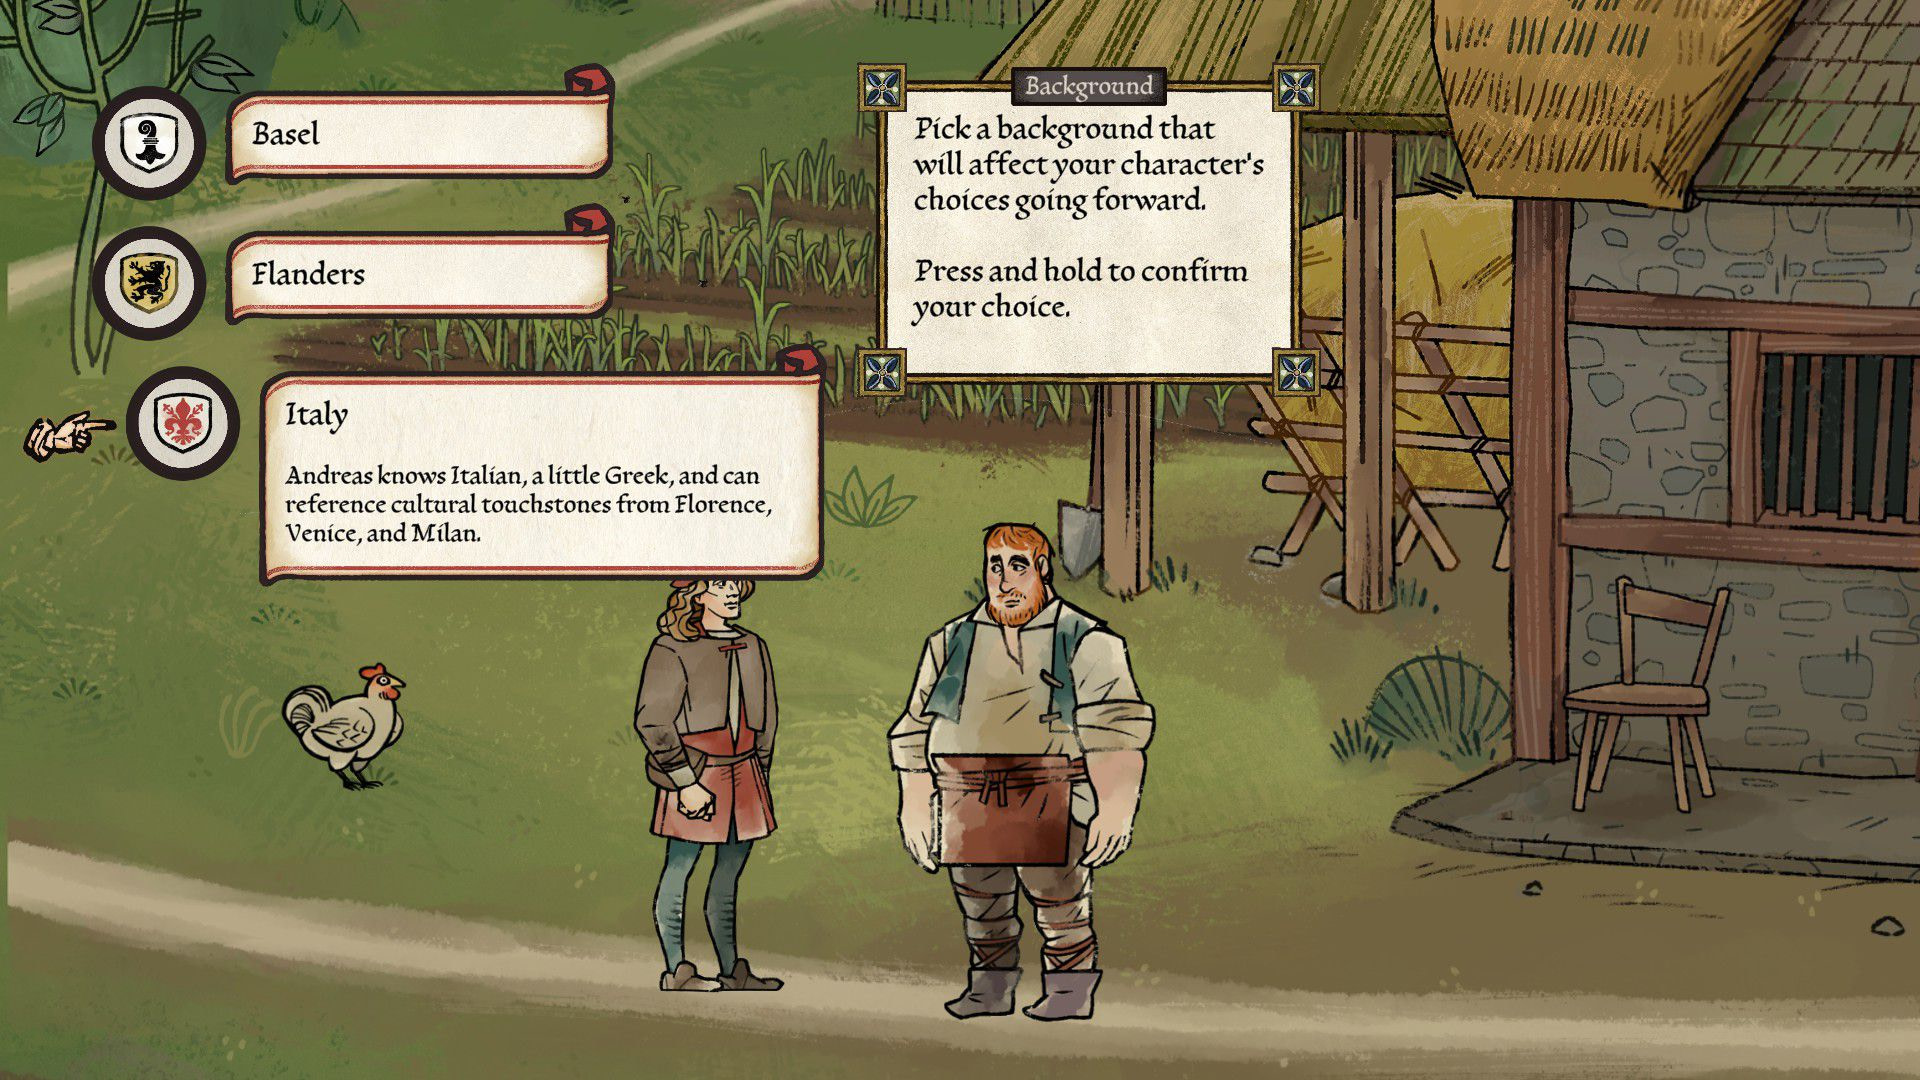 Pentiment offers players a choice of Andreas’ background as he speaks to a farmer, with manuscript pages hovering over the scene